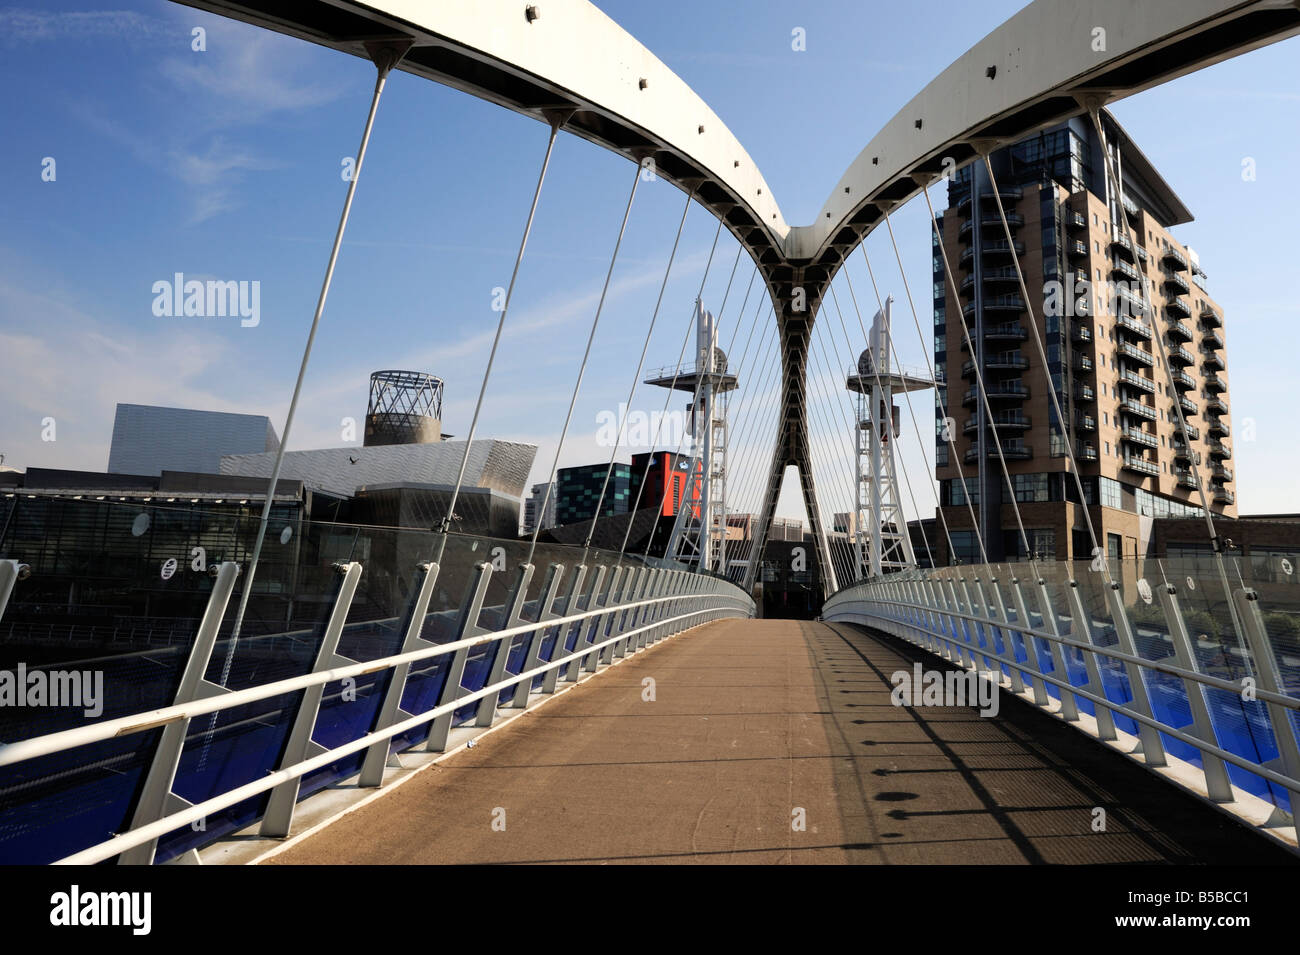 Il Lowry ponte sopra il Manchester Ship Canal, Salford Quays, Greater Manchester, Inghilterra, Europa Foto Stock